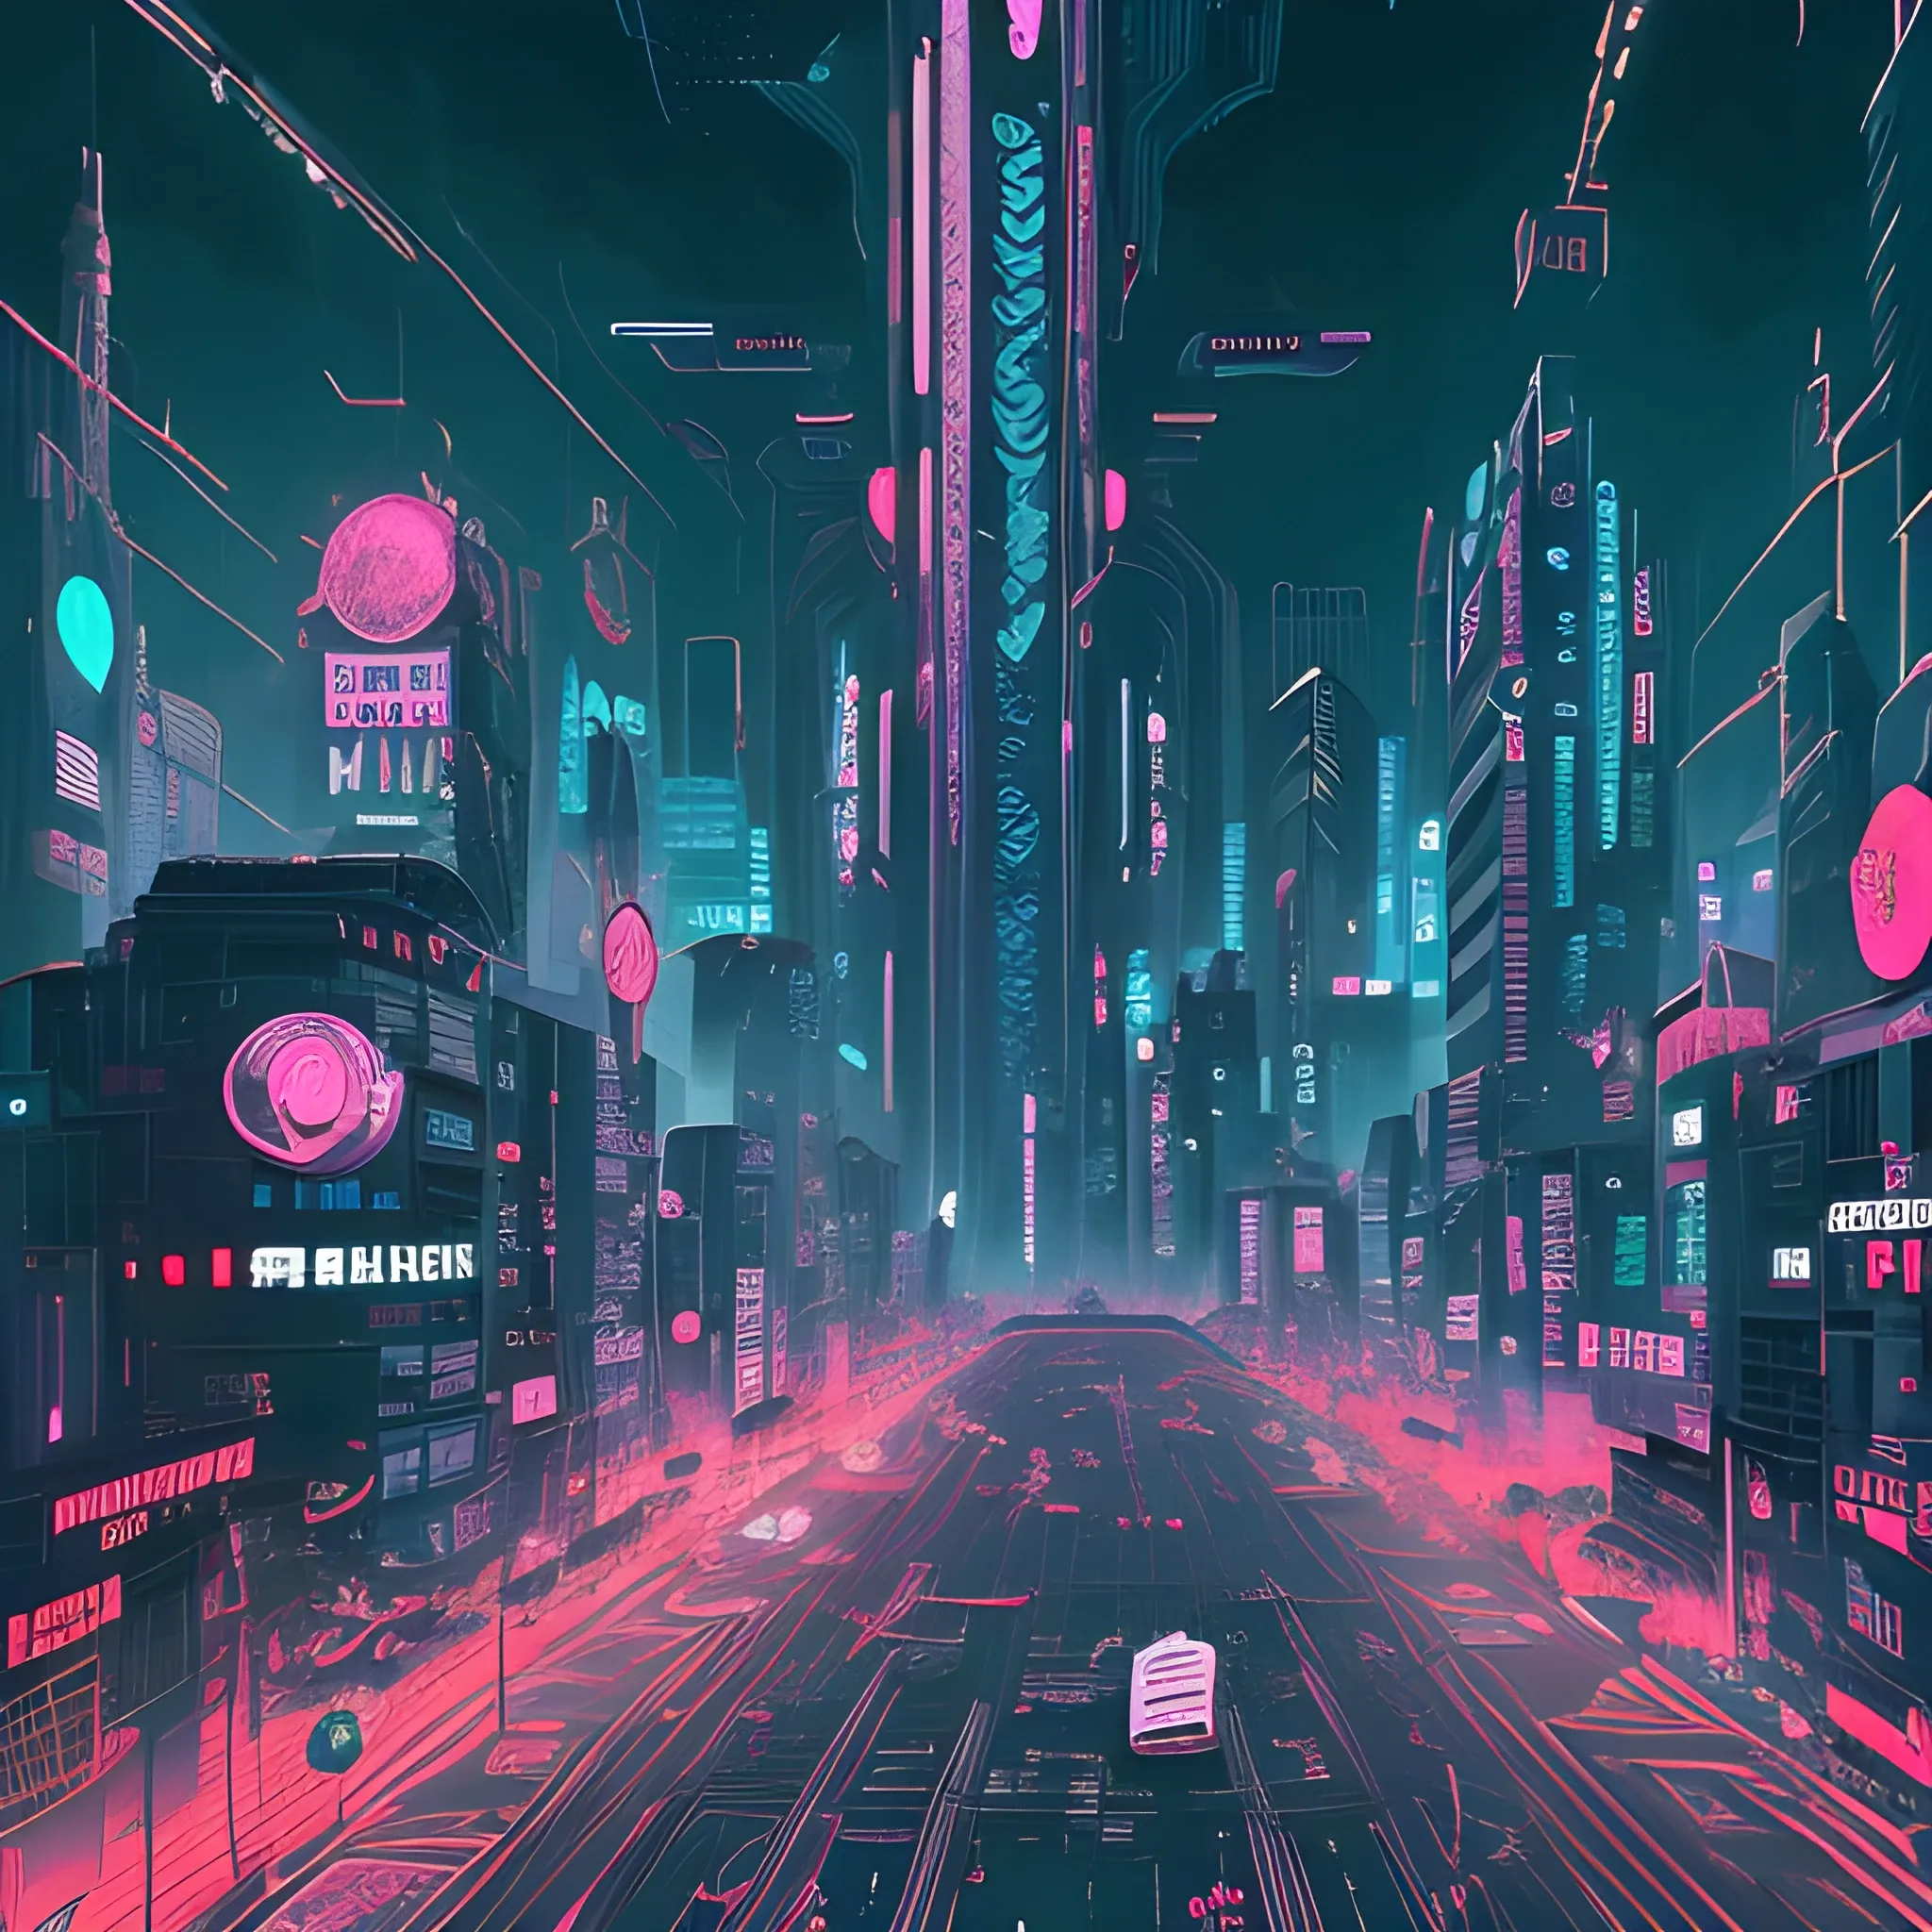 4k, beautiful, city, background of a cyberpunk by MAD DOG JONES, news app, red black colors, best illustration, no humans, no cars, vaporwave, realistic, dreamscape, incredible details, liminal space, highly detailed, cinematic ,rim lighting, trending on Behance HD

